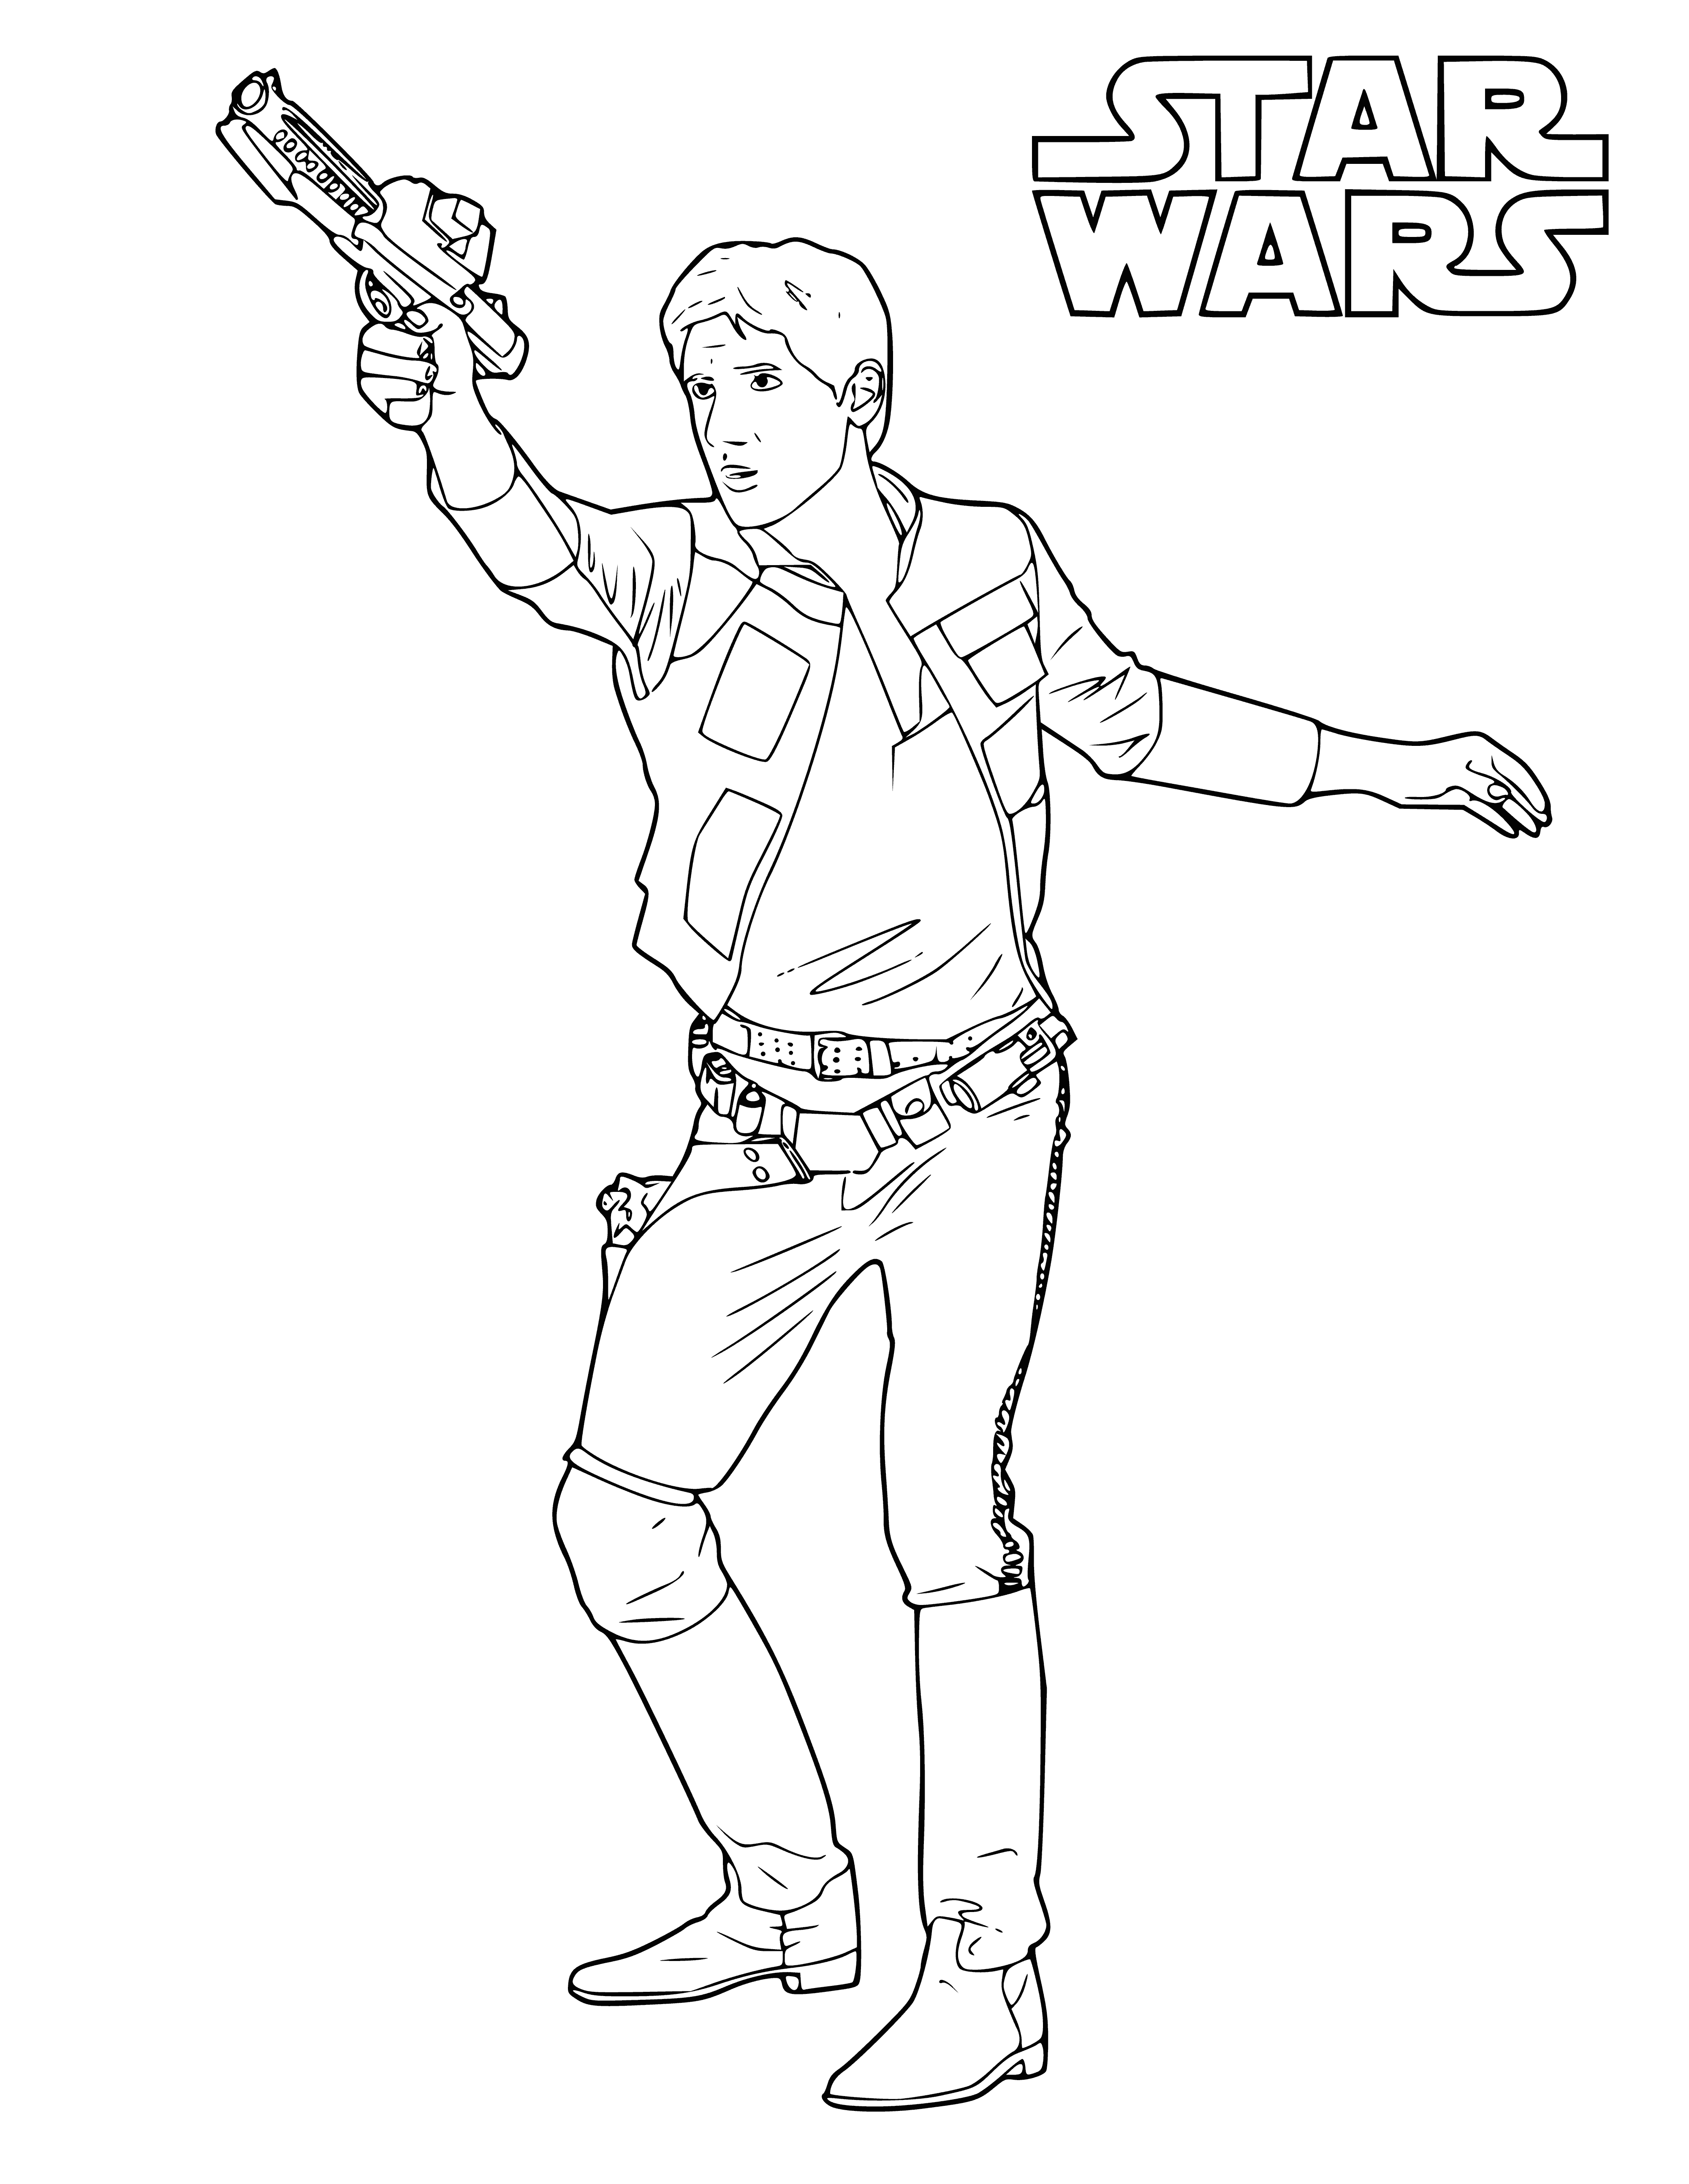 Khan Solo coloring page